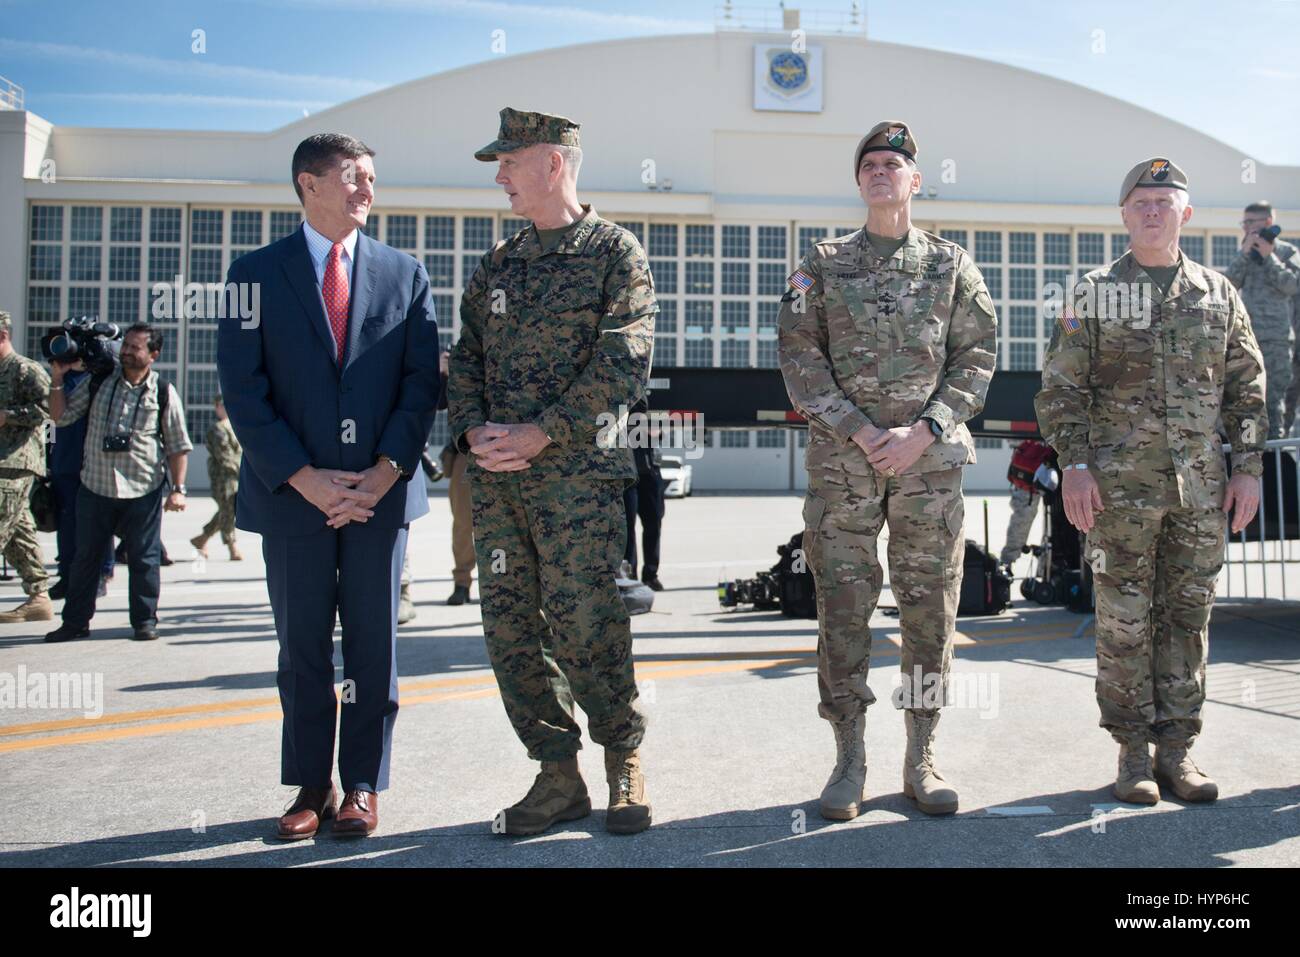 U.S. National Security Advisor Michael Flynn, left, Joint Chiefs Chairman Joseph Dunford, Central Command General Joseph Votel, and Special Operations Command Commander Tony Thomas await the arrival of U.S. President Donald Trump at the MacDill Air Force Base February 6, 2017 near Tampa, Florida. Stock Photo